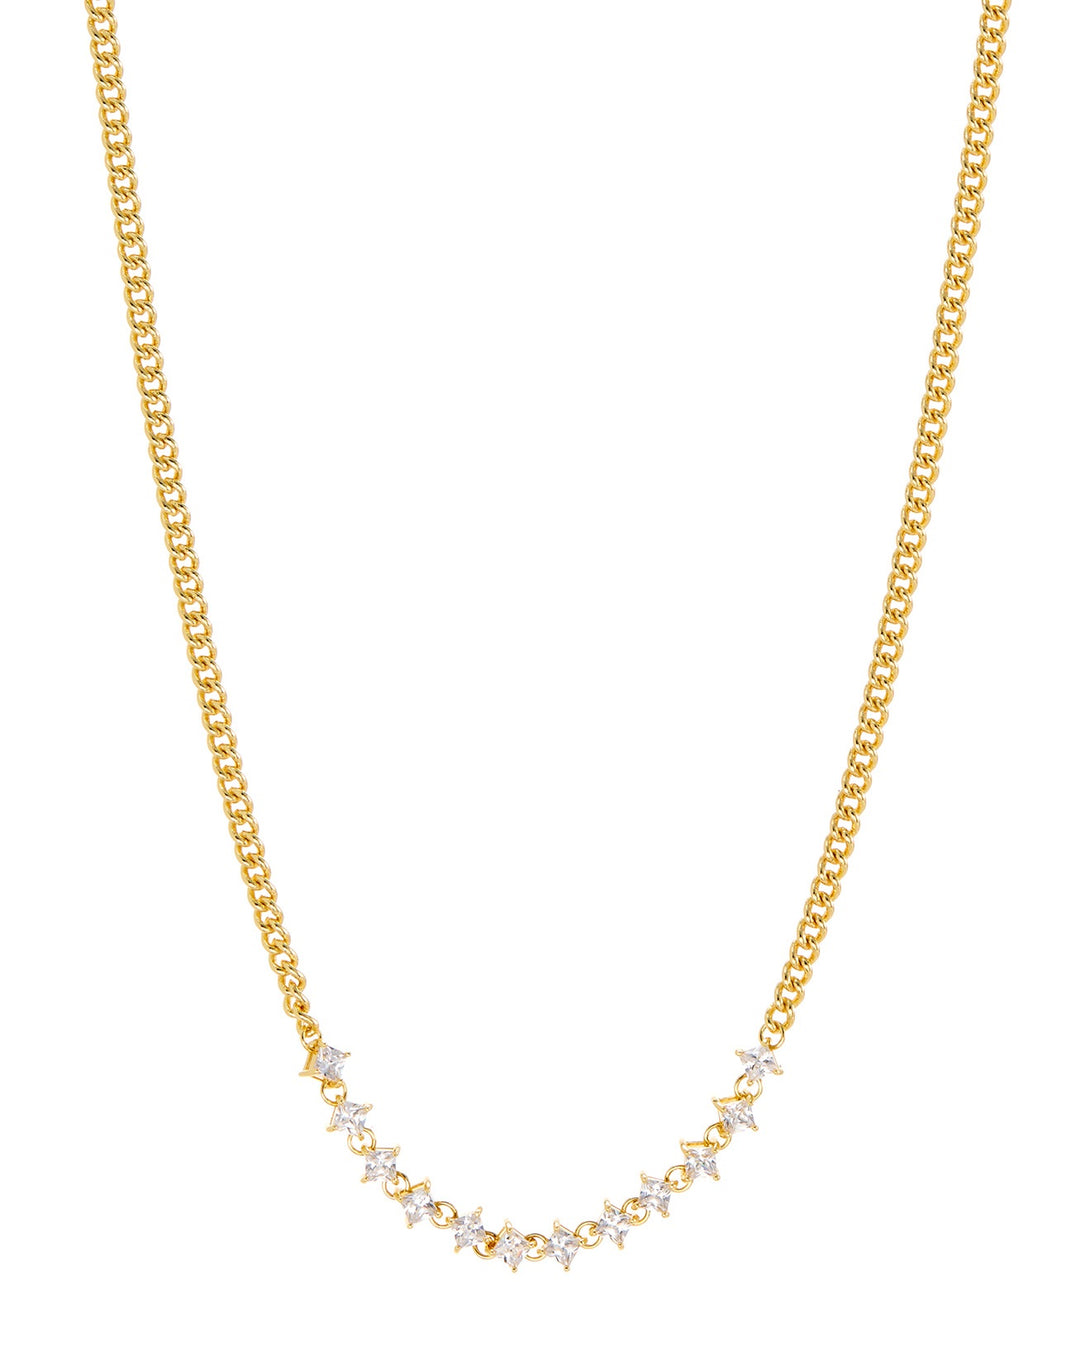 LUV AJ - The Ballier Curb Chain Necklace in Gold